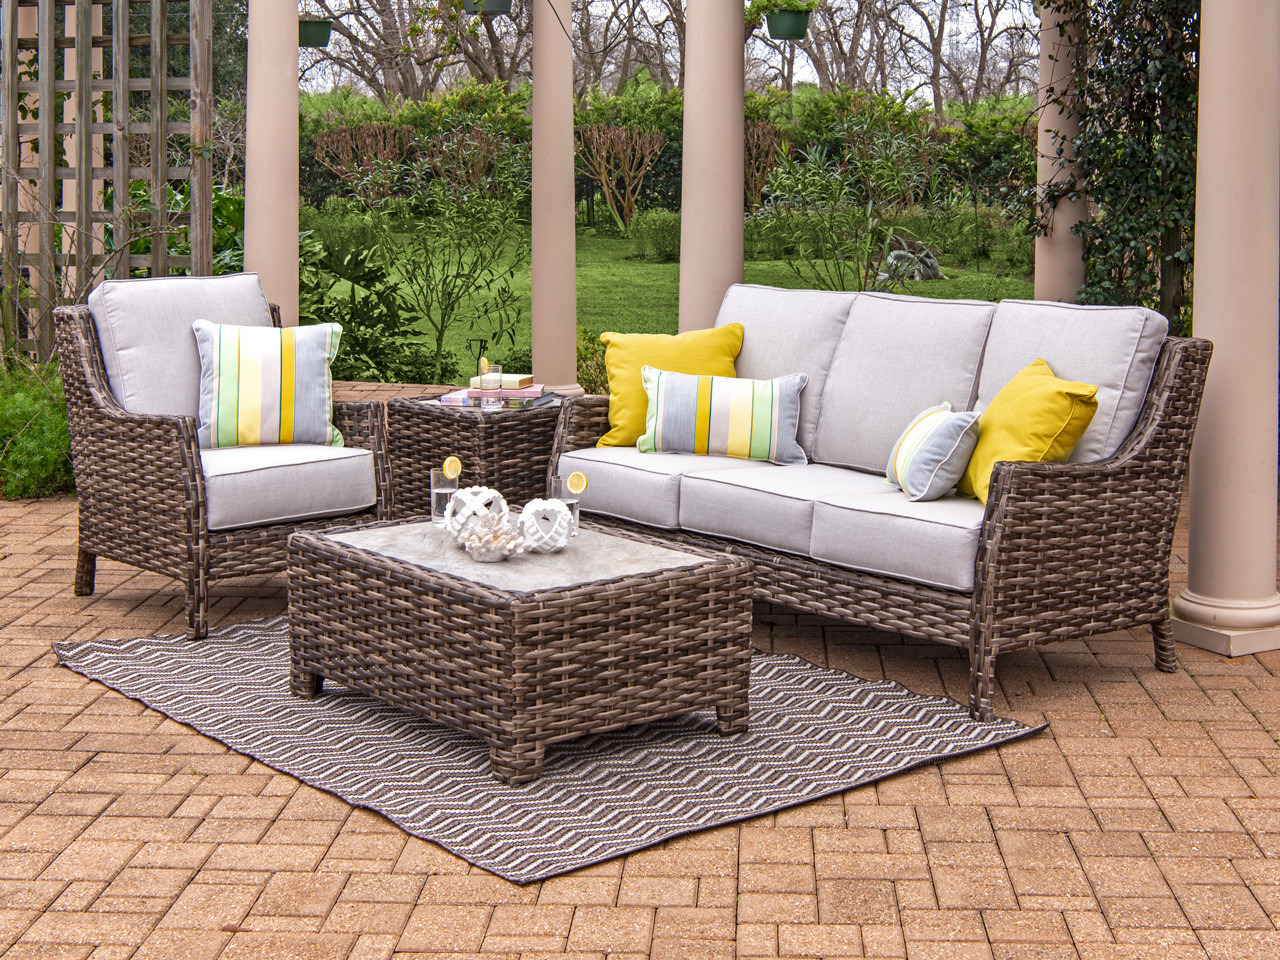 Cabo Caribou Outdoor Wicker and Idol Seagull Cushion 3 Pc. Sofa Group with 40 x 28 in. Coffee Table